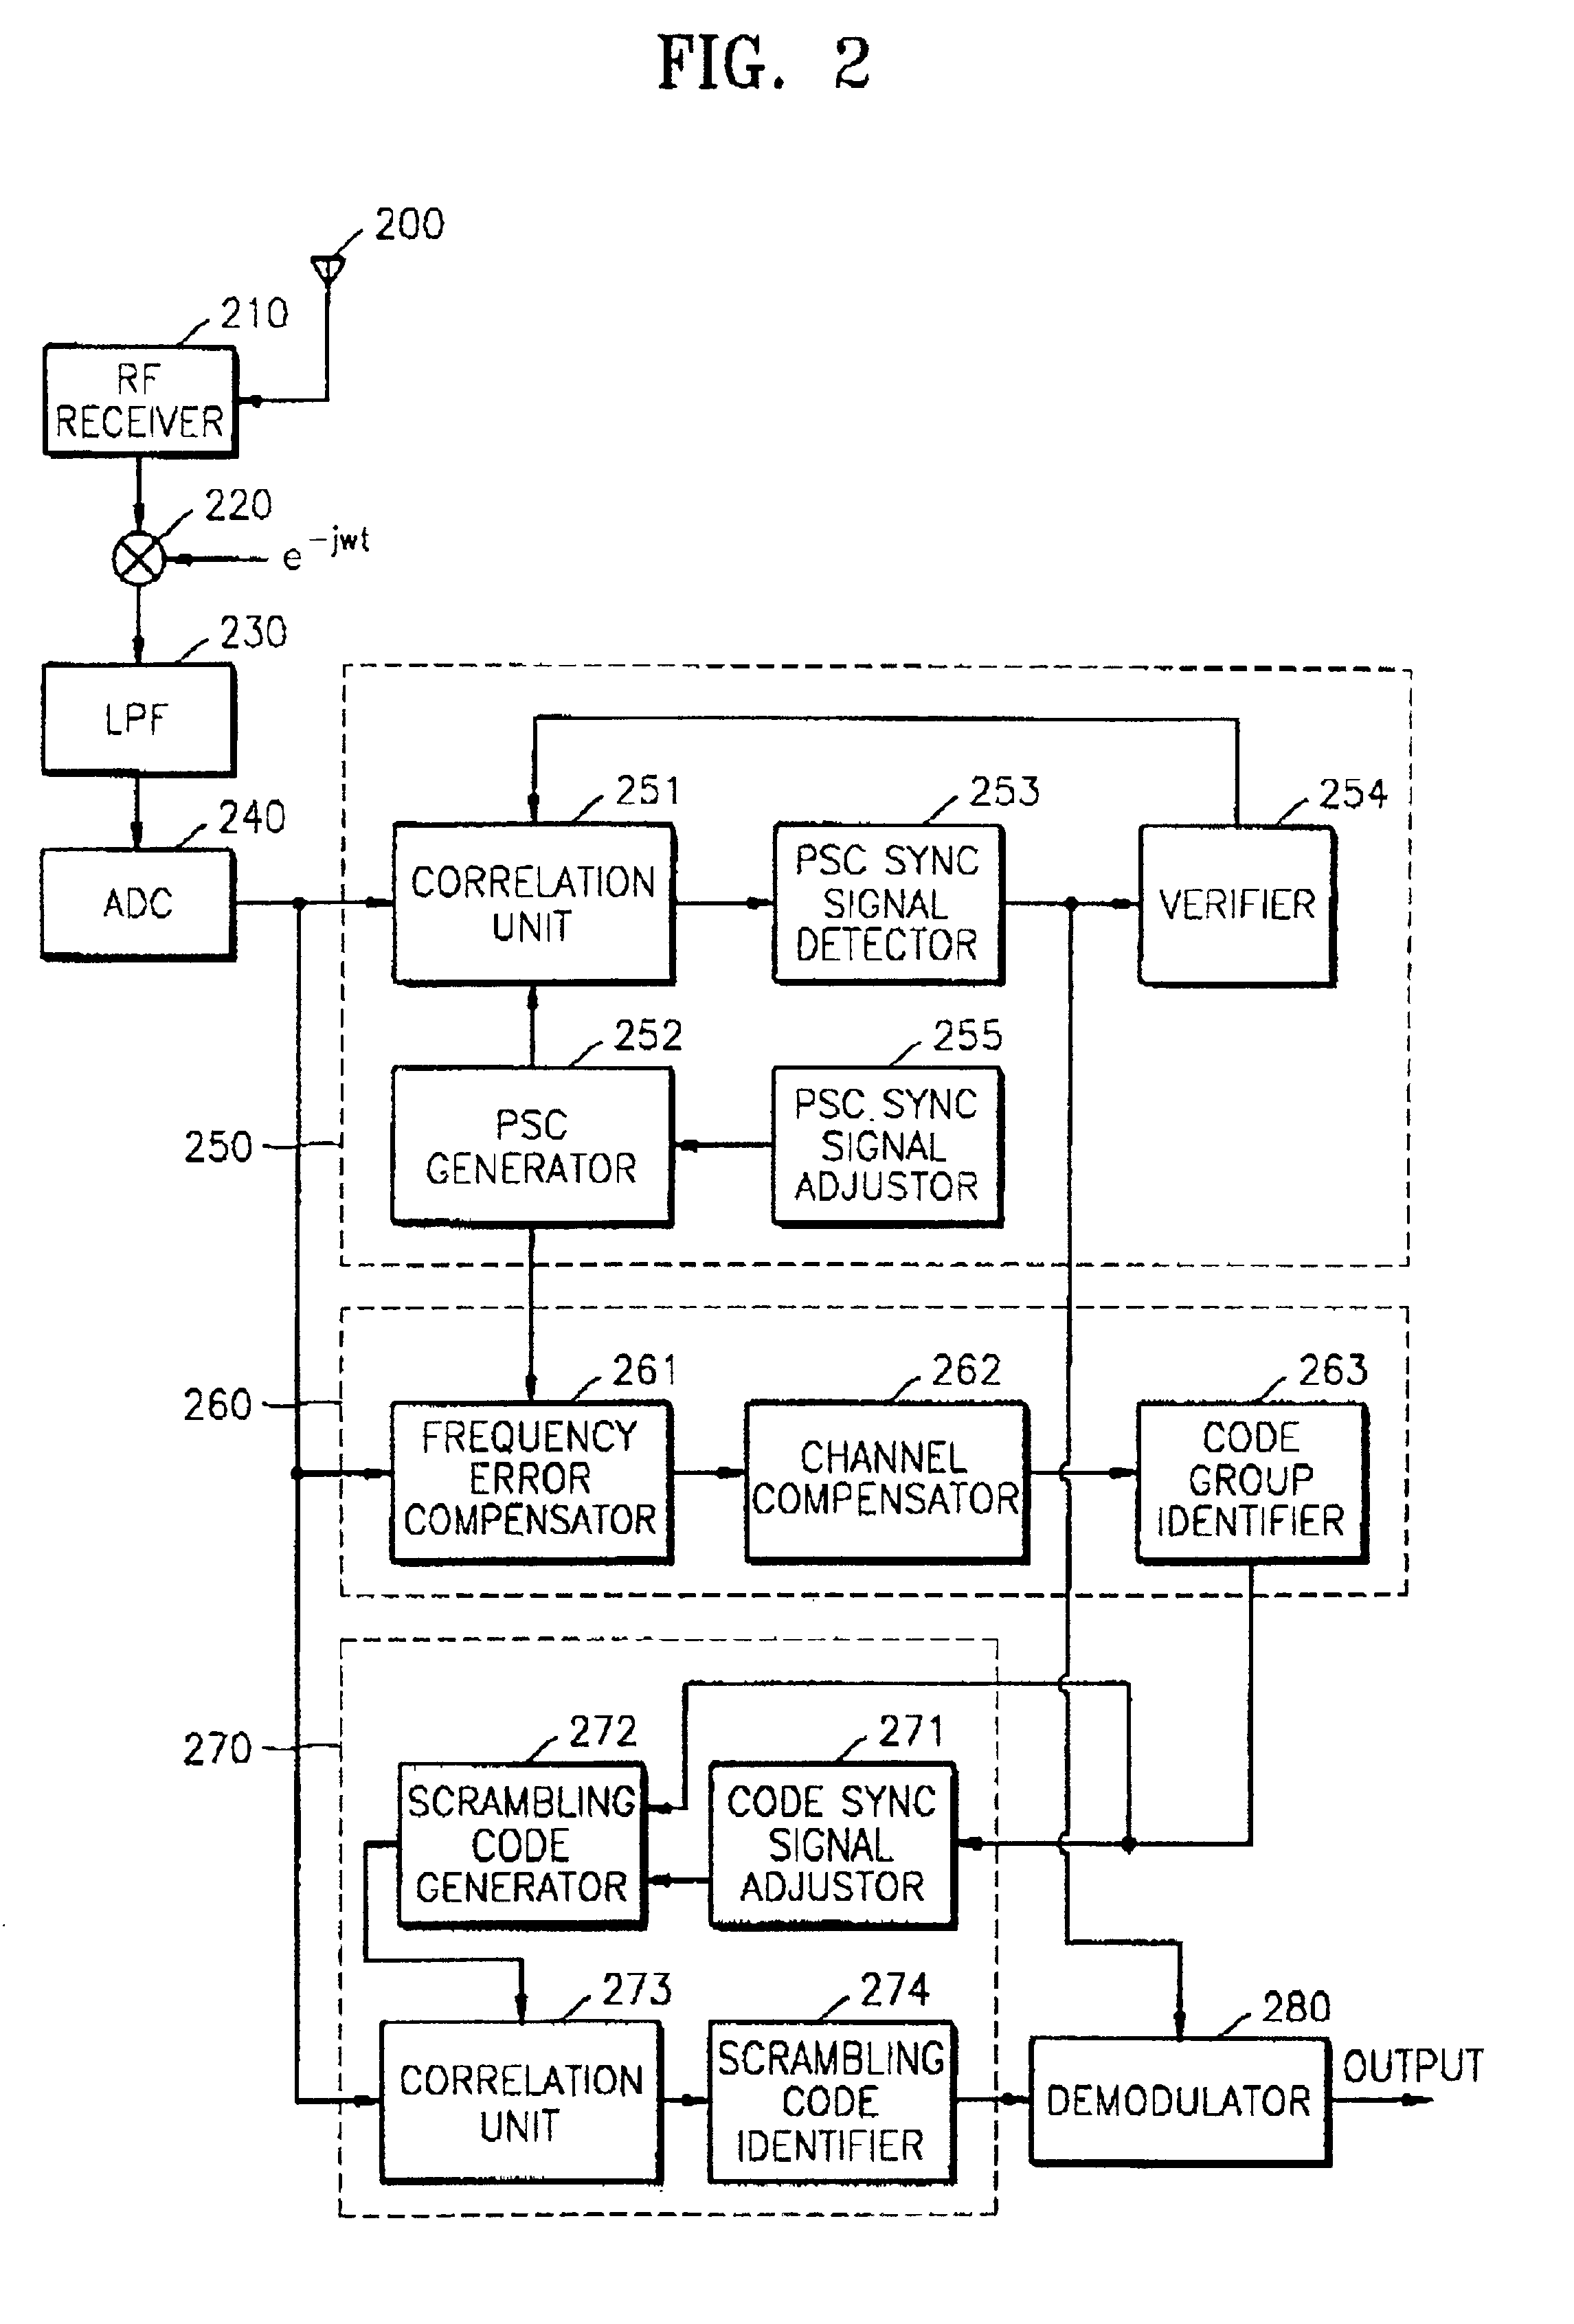 Apparatus for searching for a cell and method of acquiring code unique to each cell in an asynchronous wideband DS/CDMA receiver